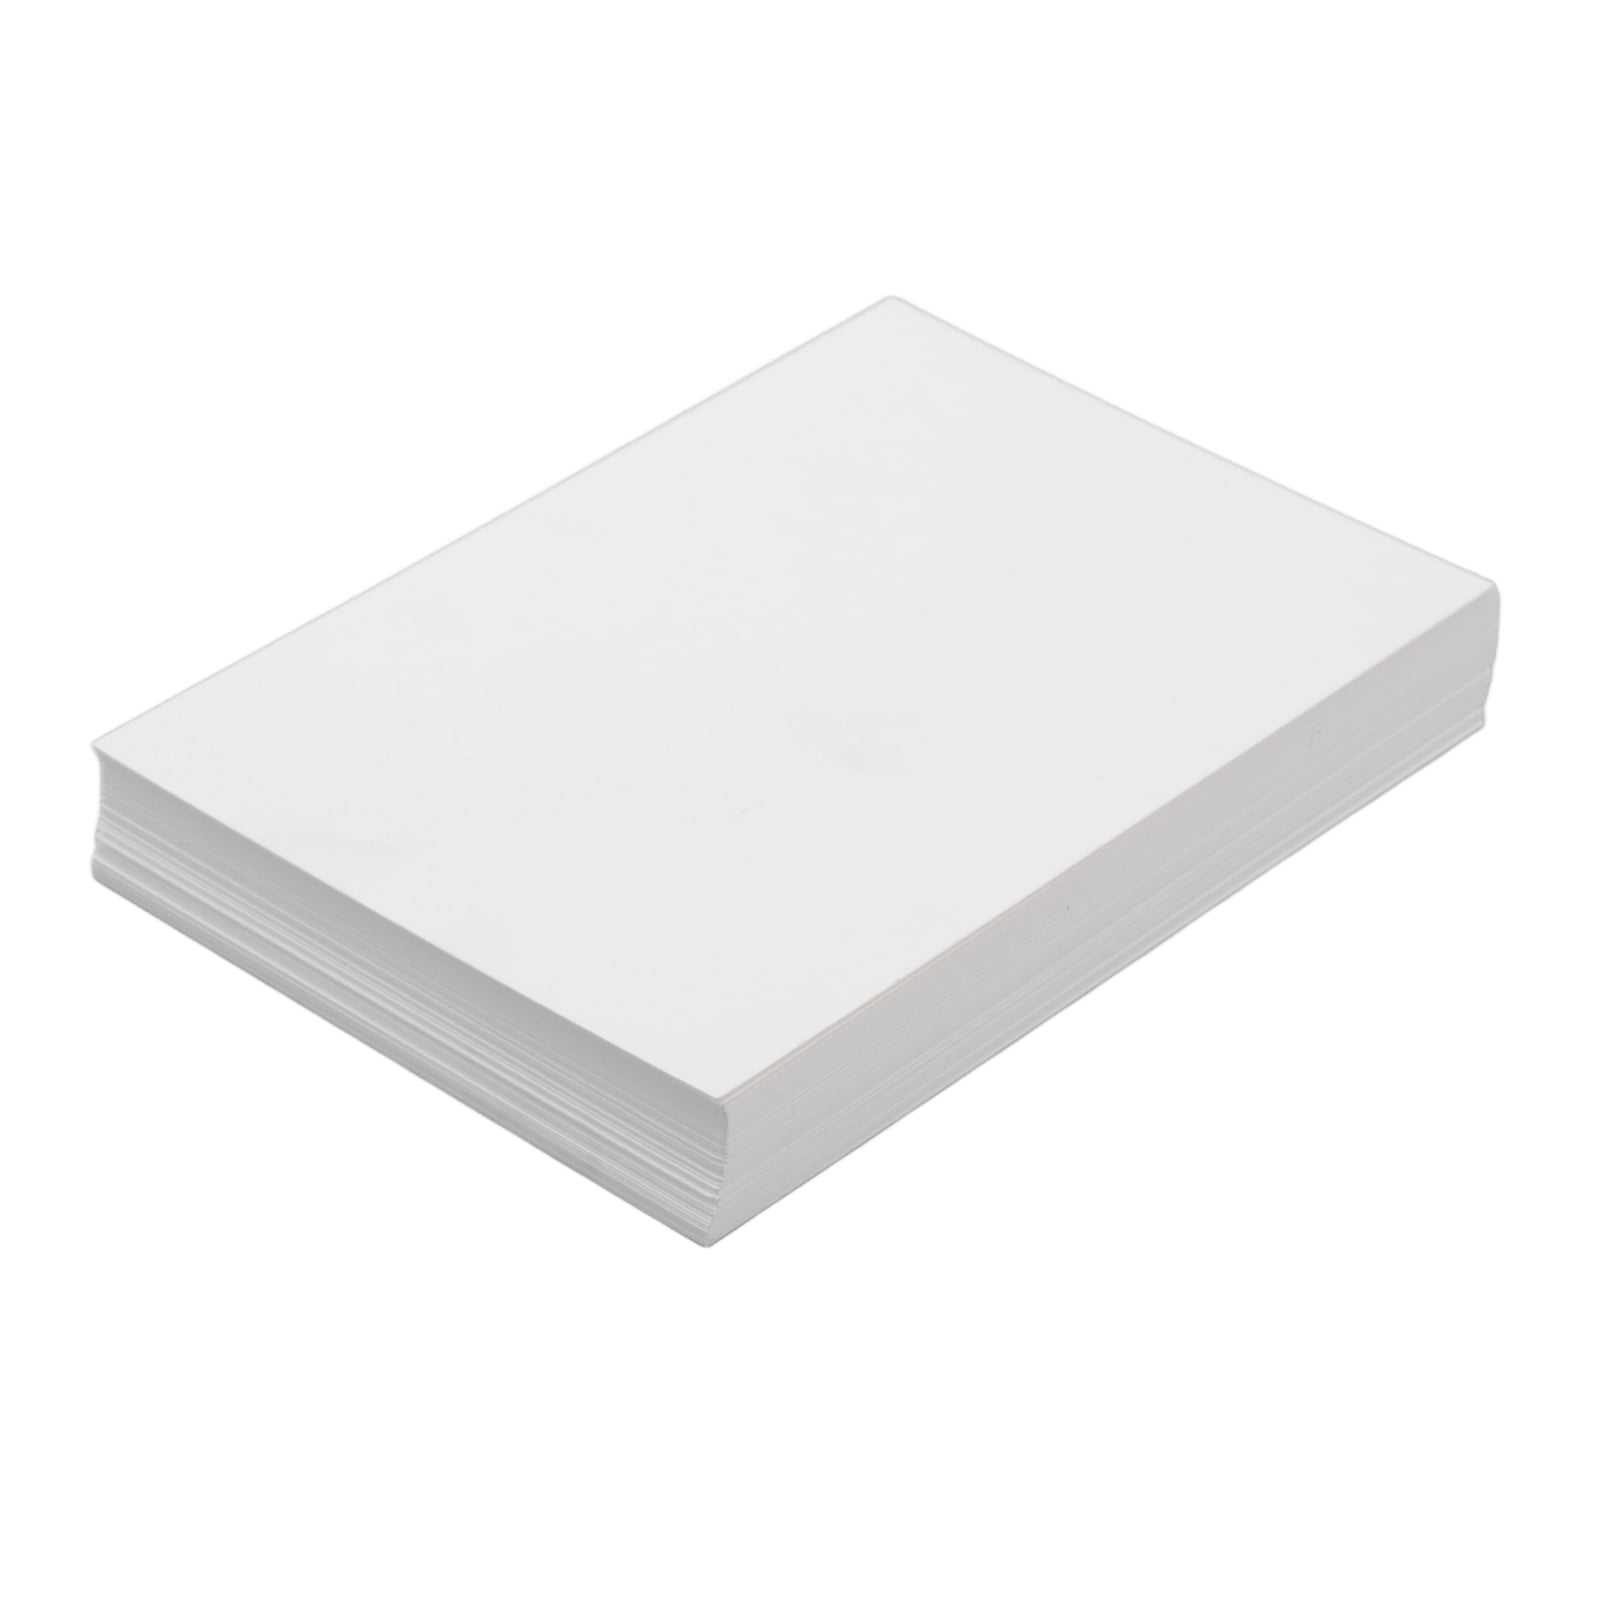 Uxcell 0.21mm Sublimation Metal Business Cards Blank Aluminum Printable  Card, White 150Pack 